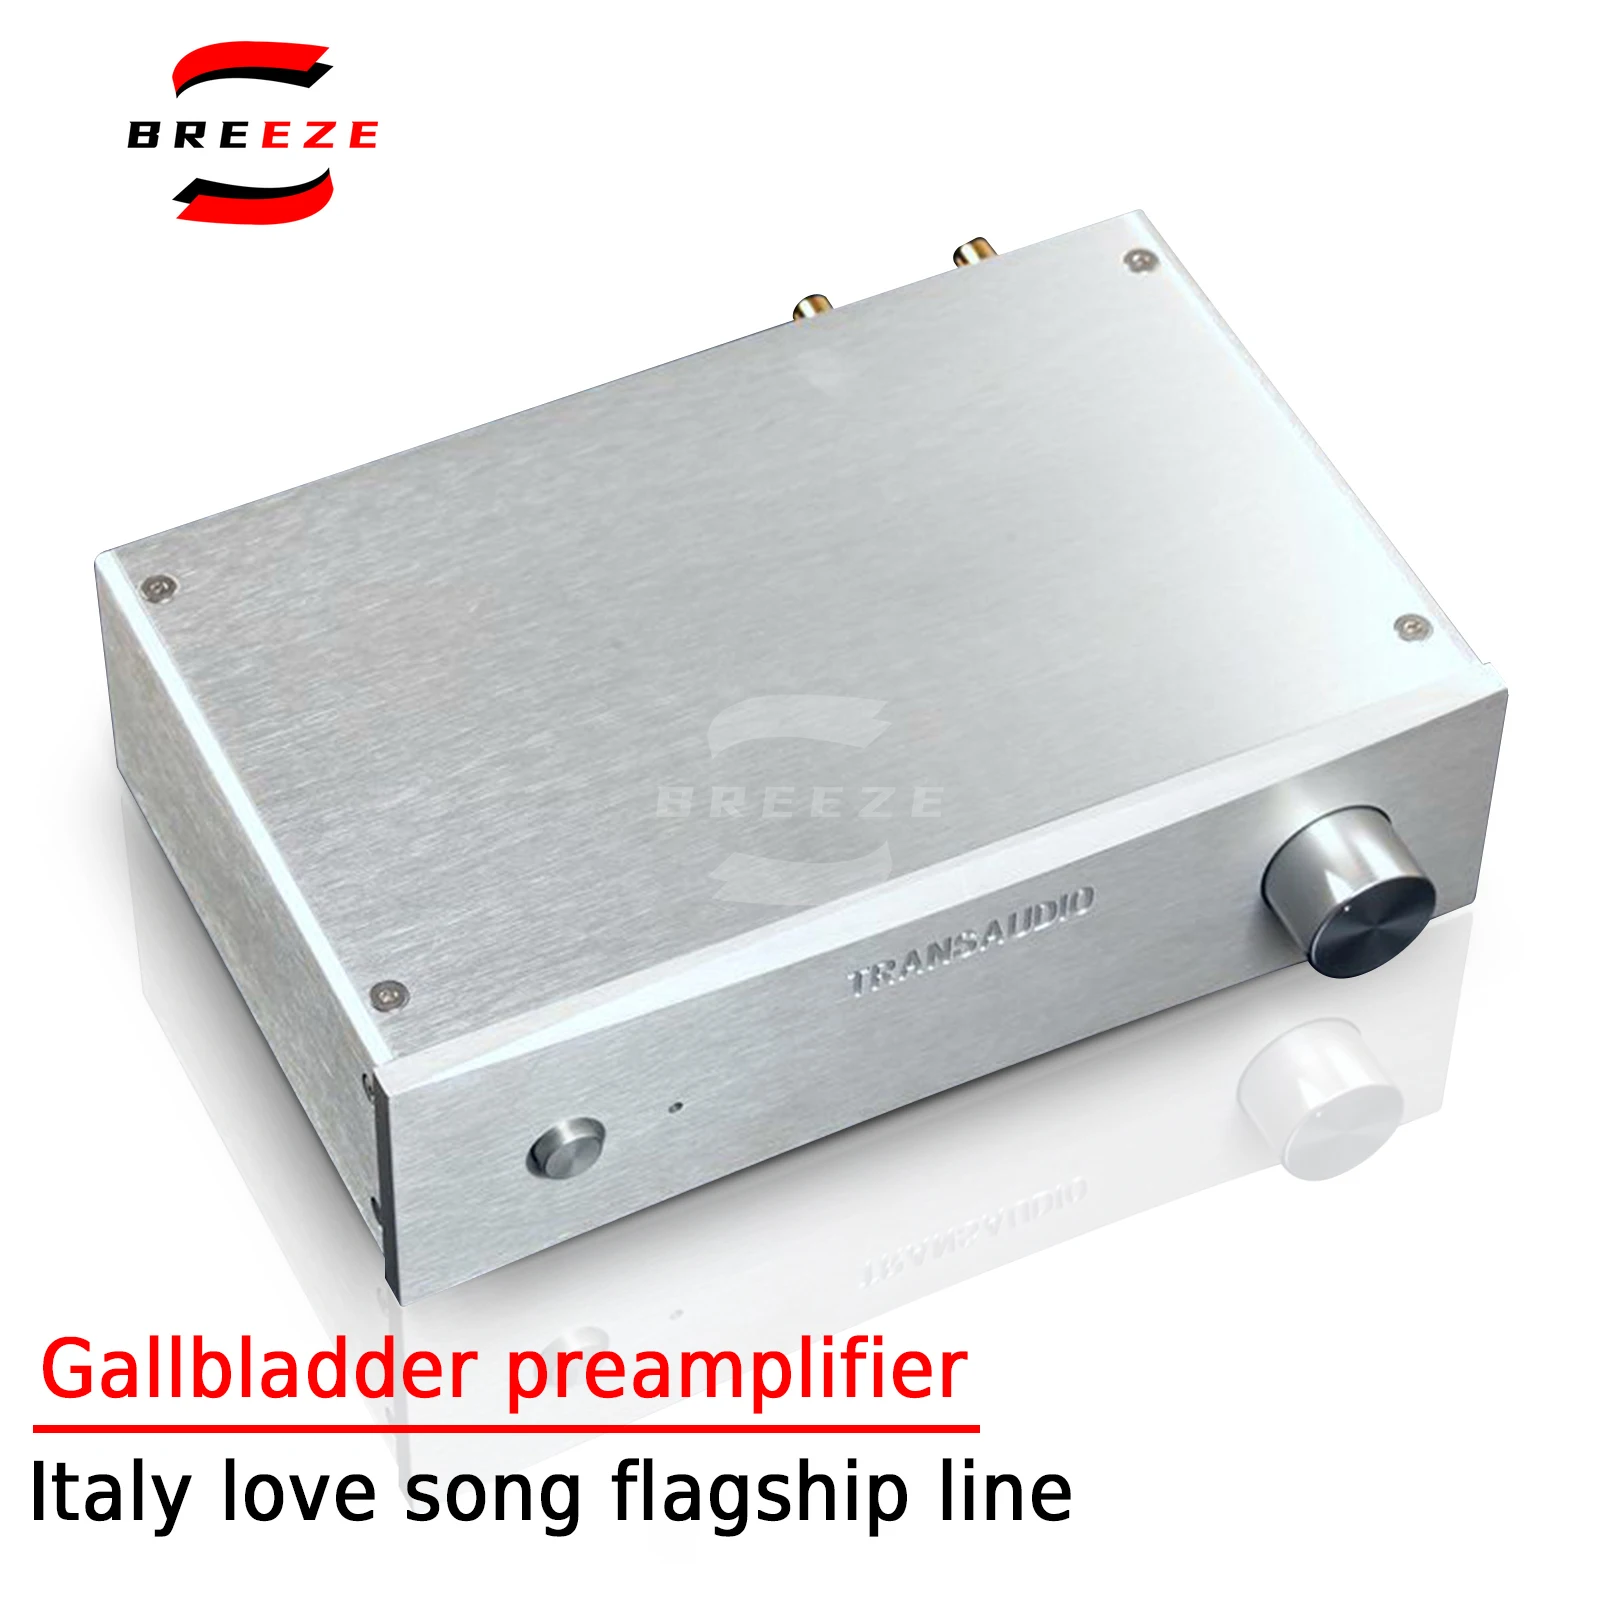 

BREEZEHIFI Pre-amplifier Minimalist Fever Bile Flavor Using Italy Agge Flagship Line Home Theater